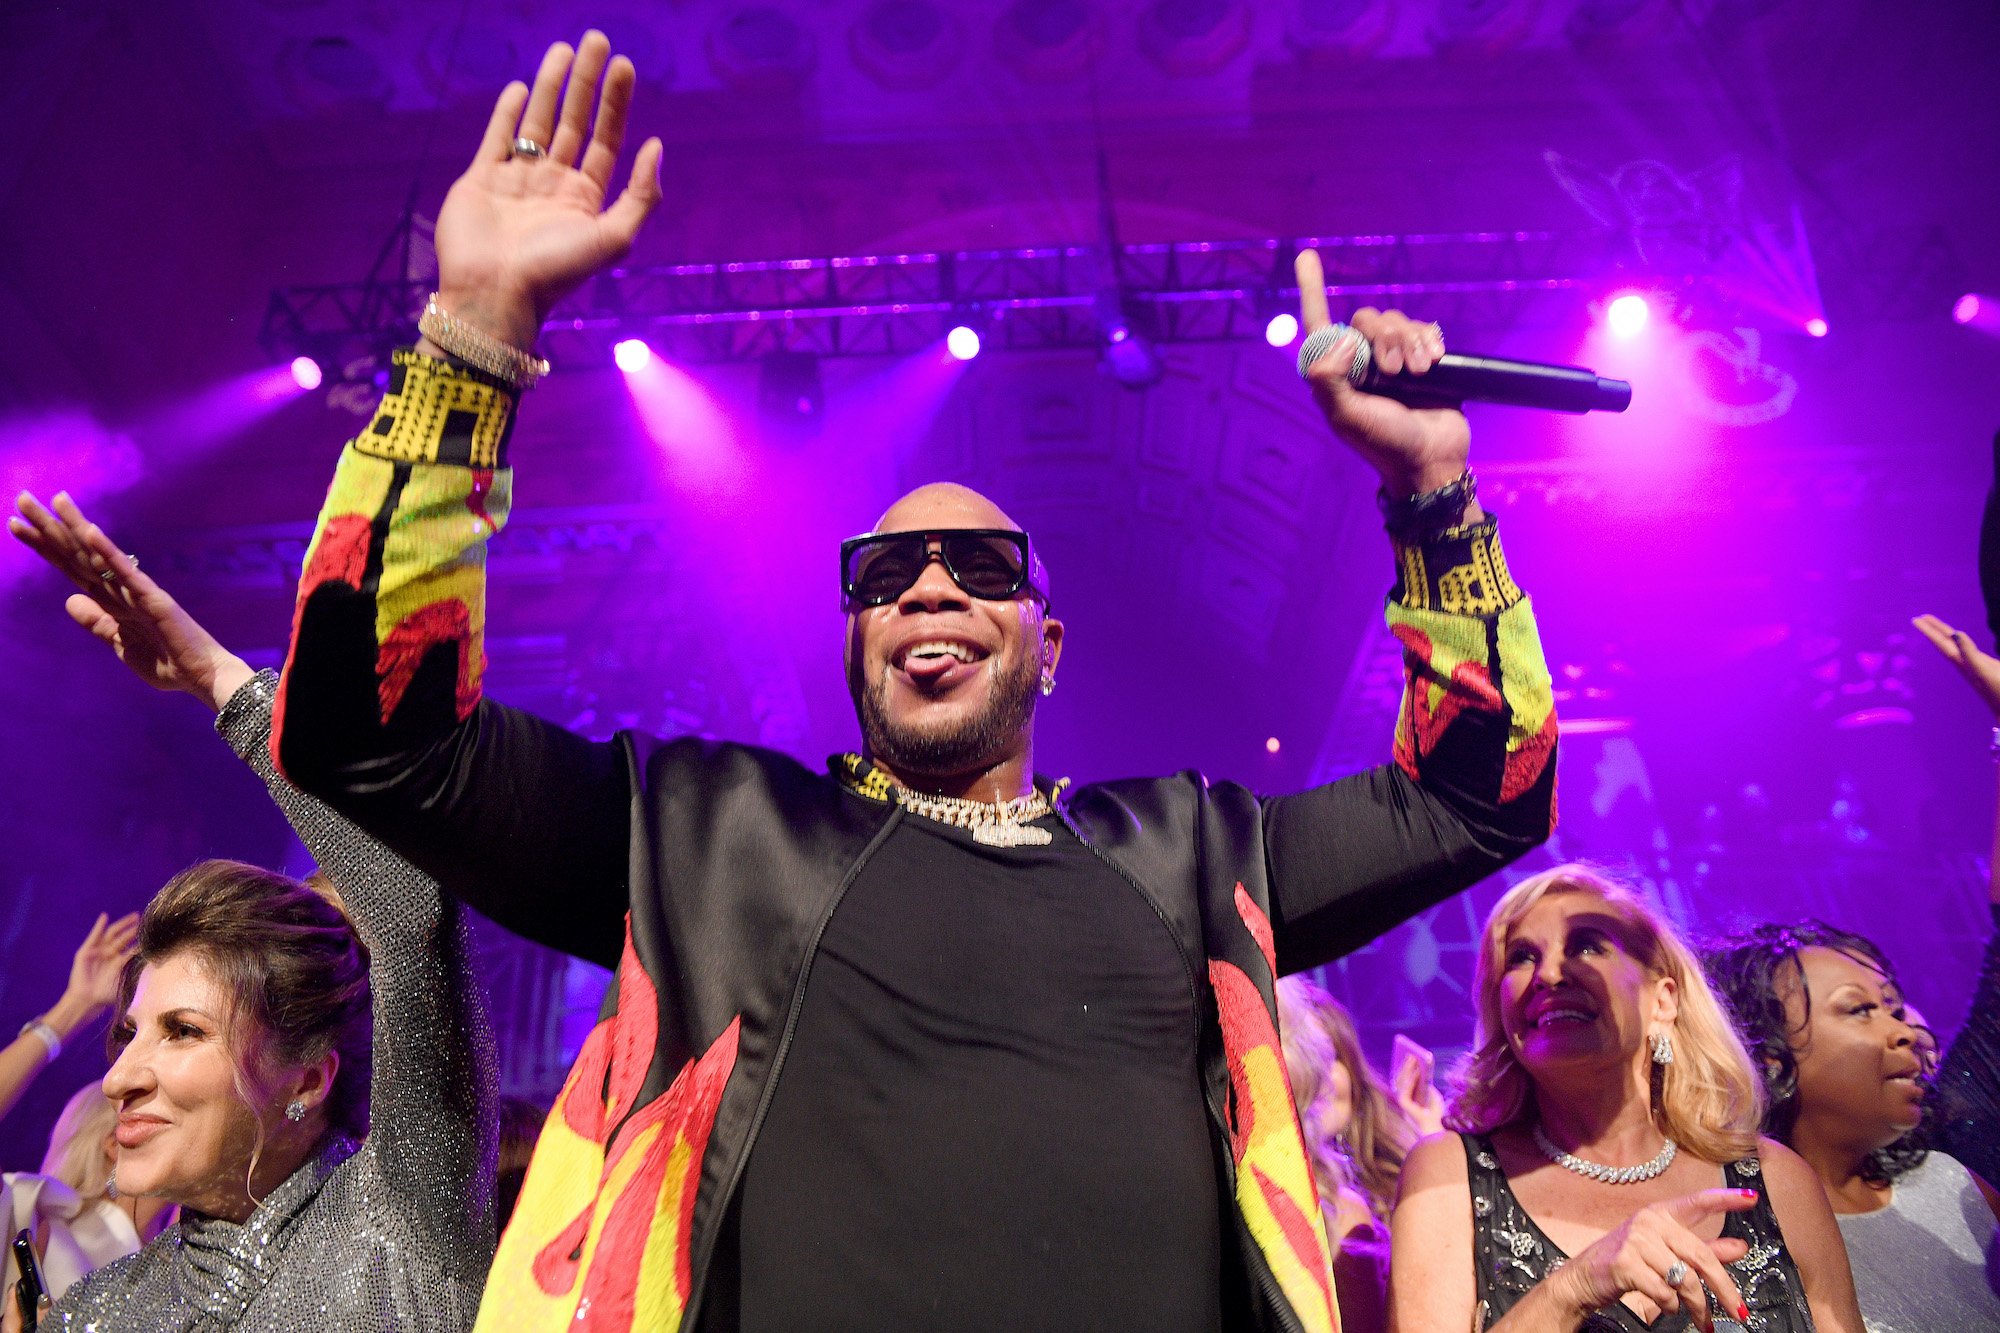 Flo Rida's New Song 'Dancer': Watch the Strip Club-Themed Video